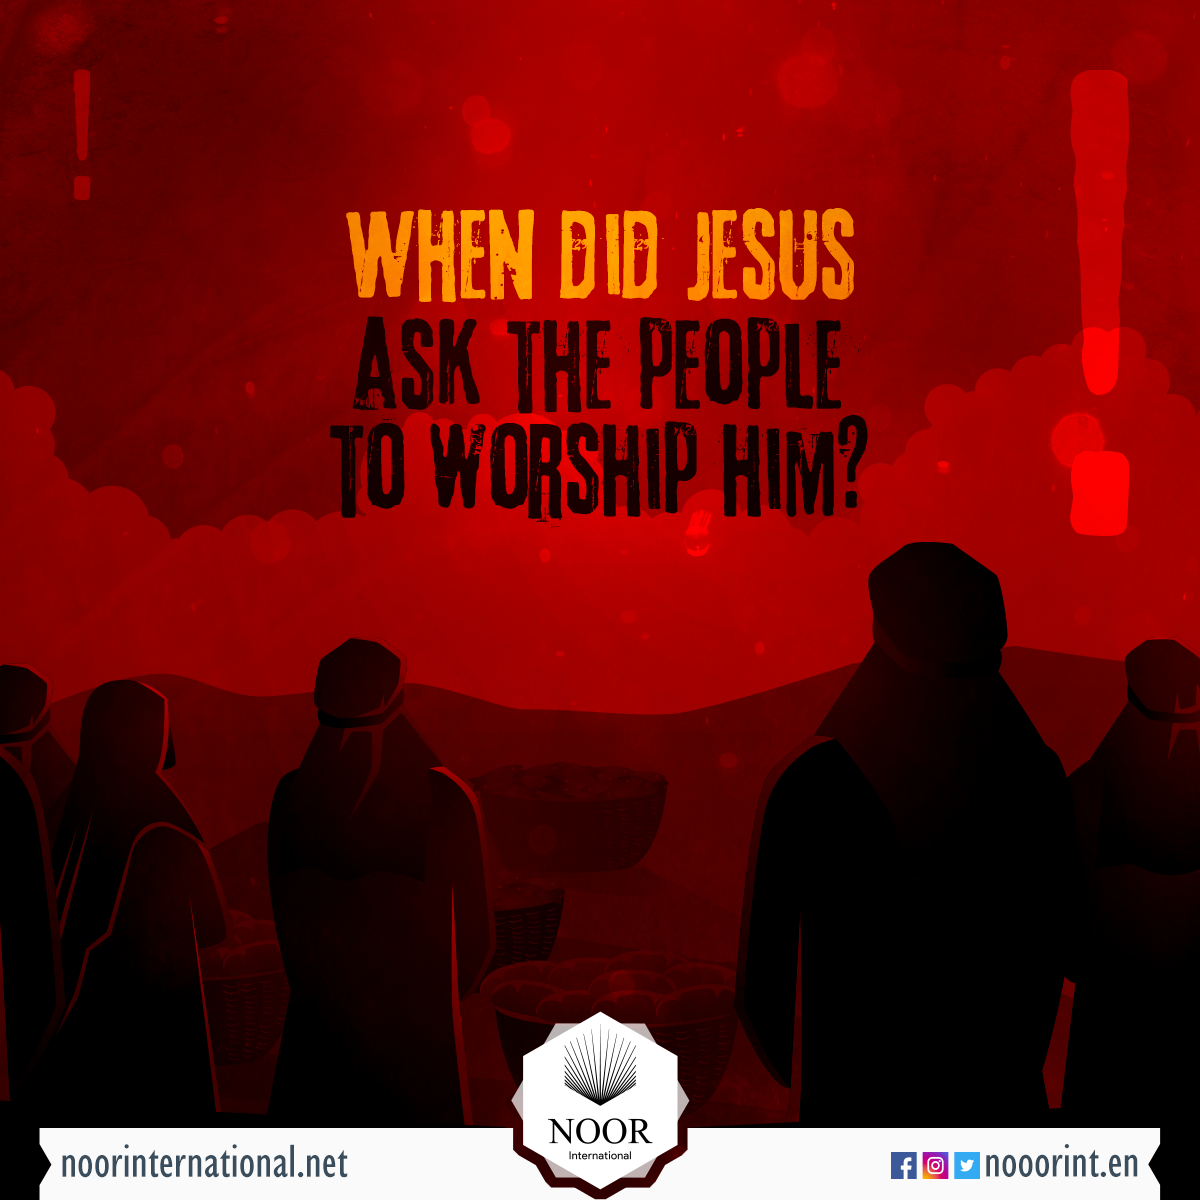 When did the Christ ask the people to worship him ??